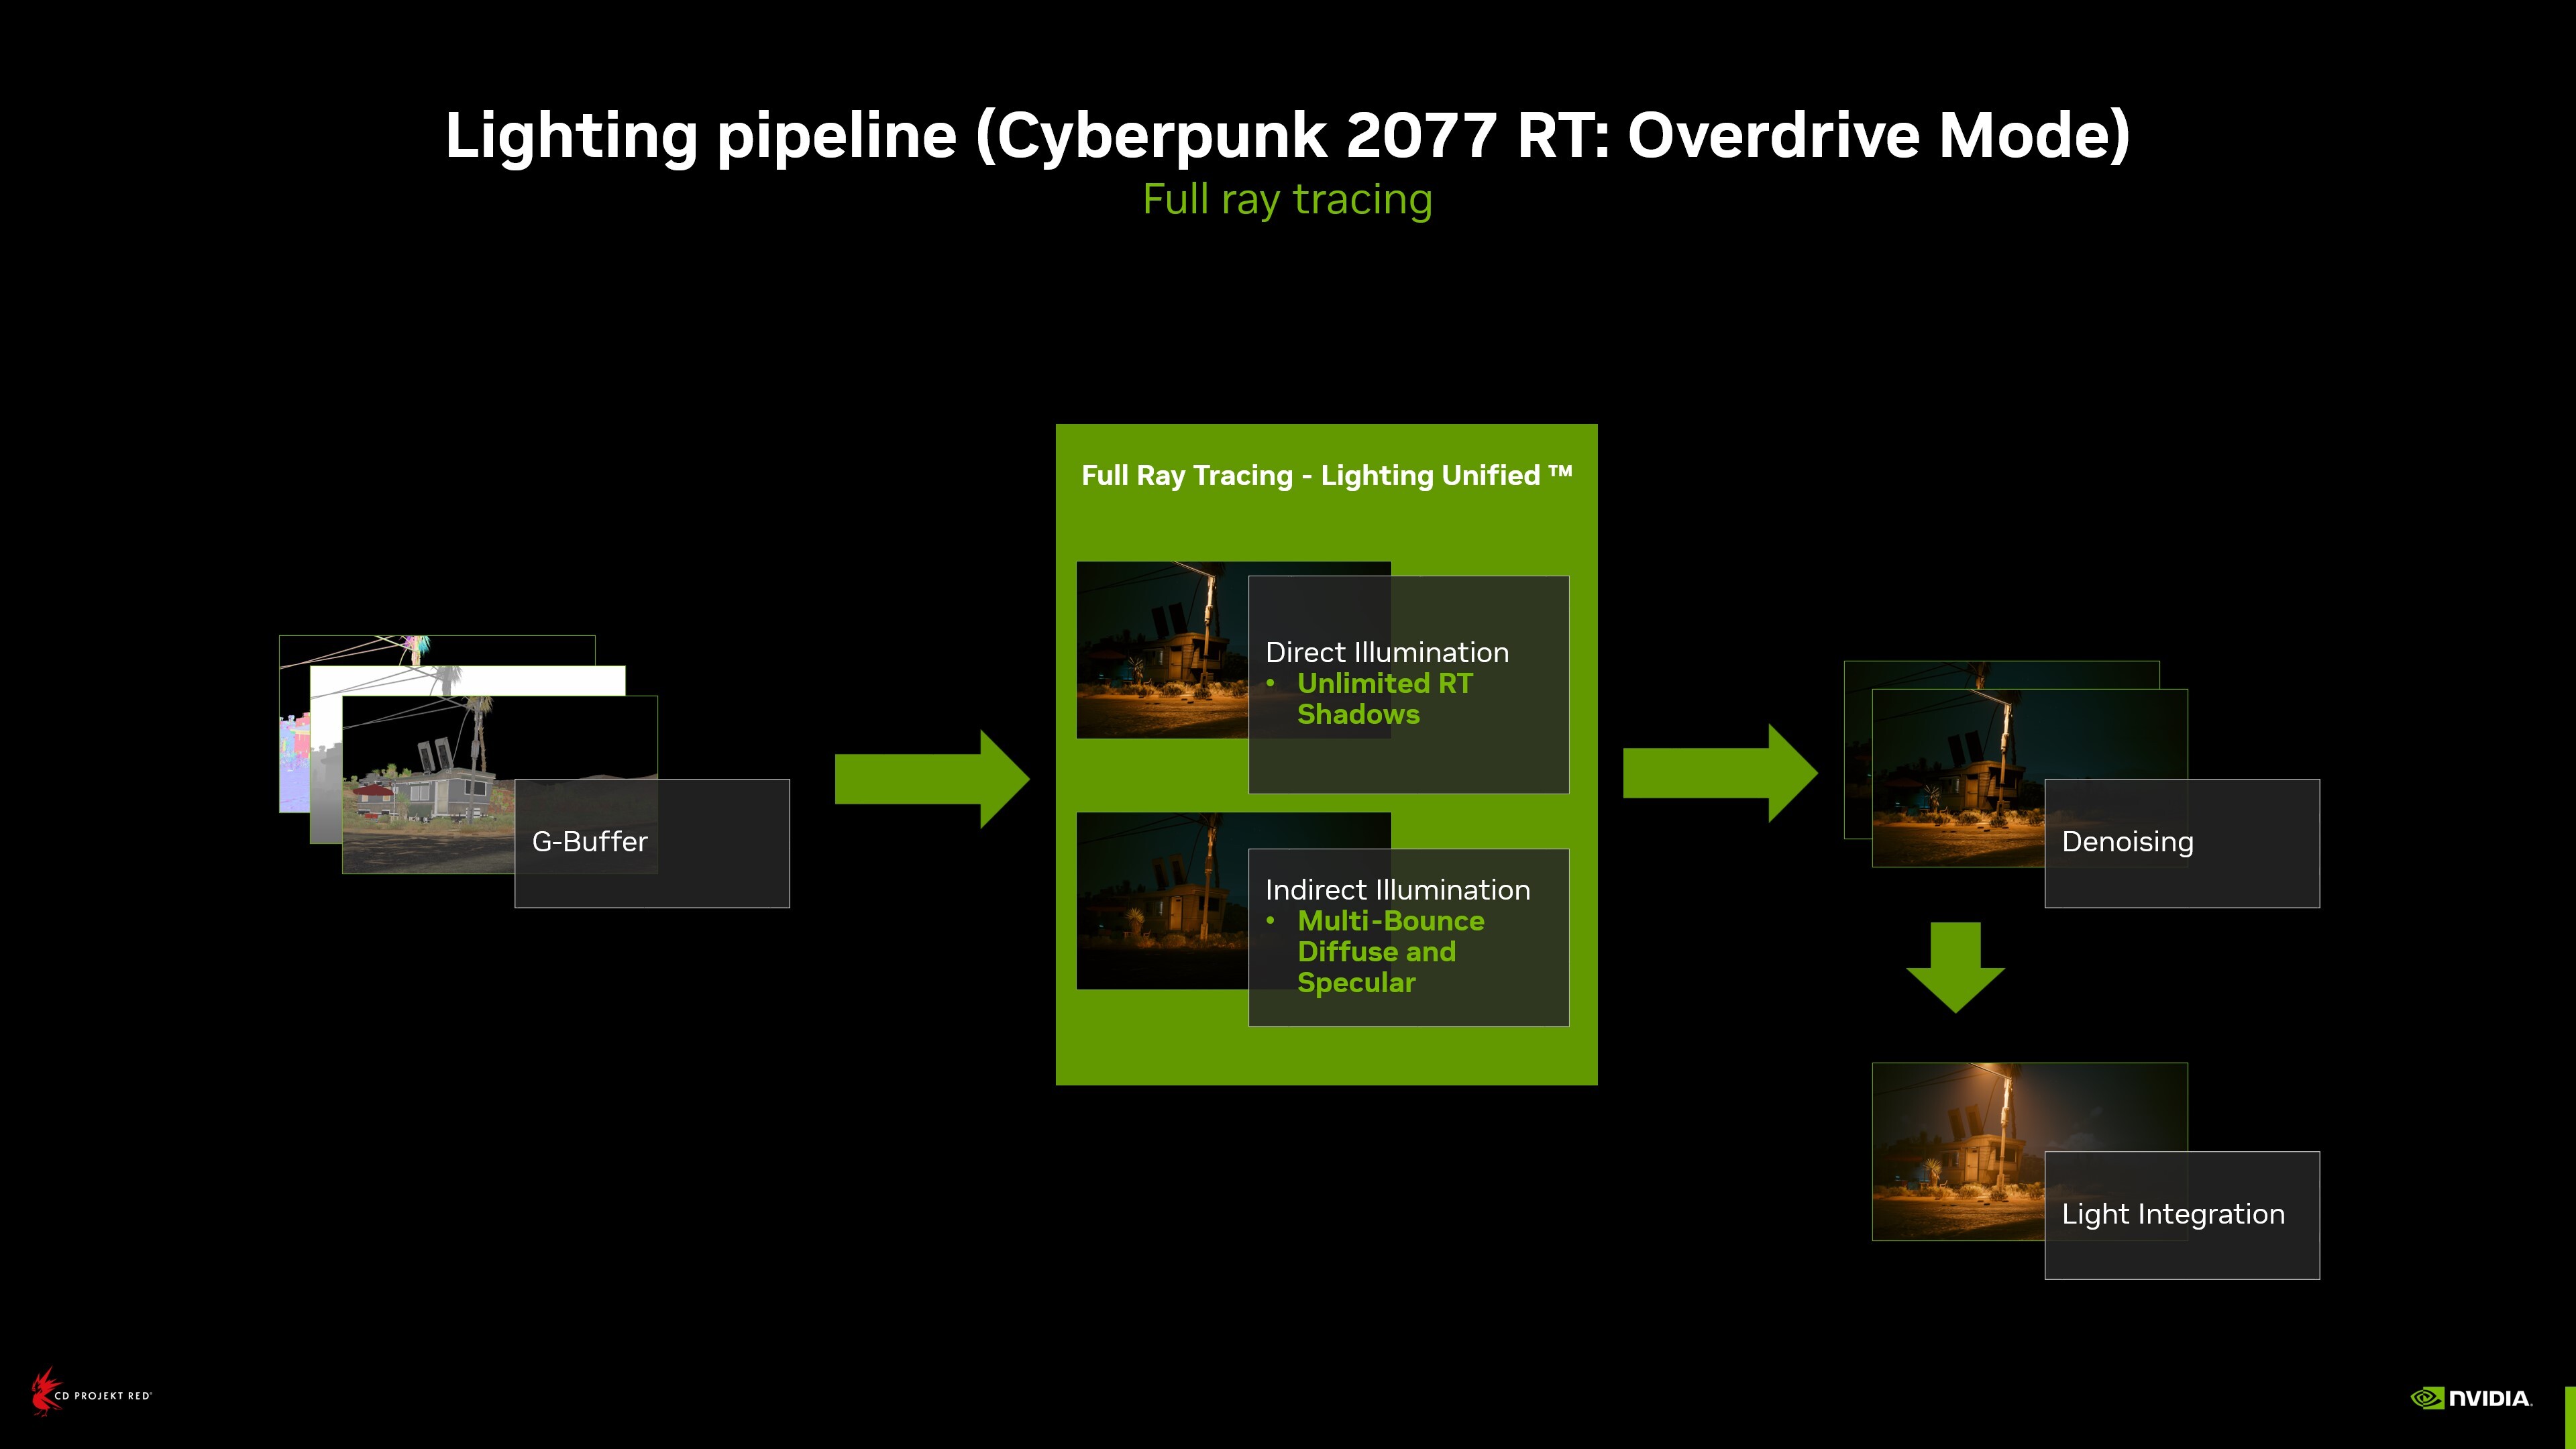 Cyberpunk 2077: Technology Preview Of New Ray Tracing Overdrive Mode Out  Now, GeForce News